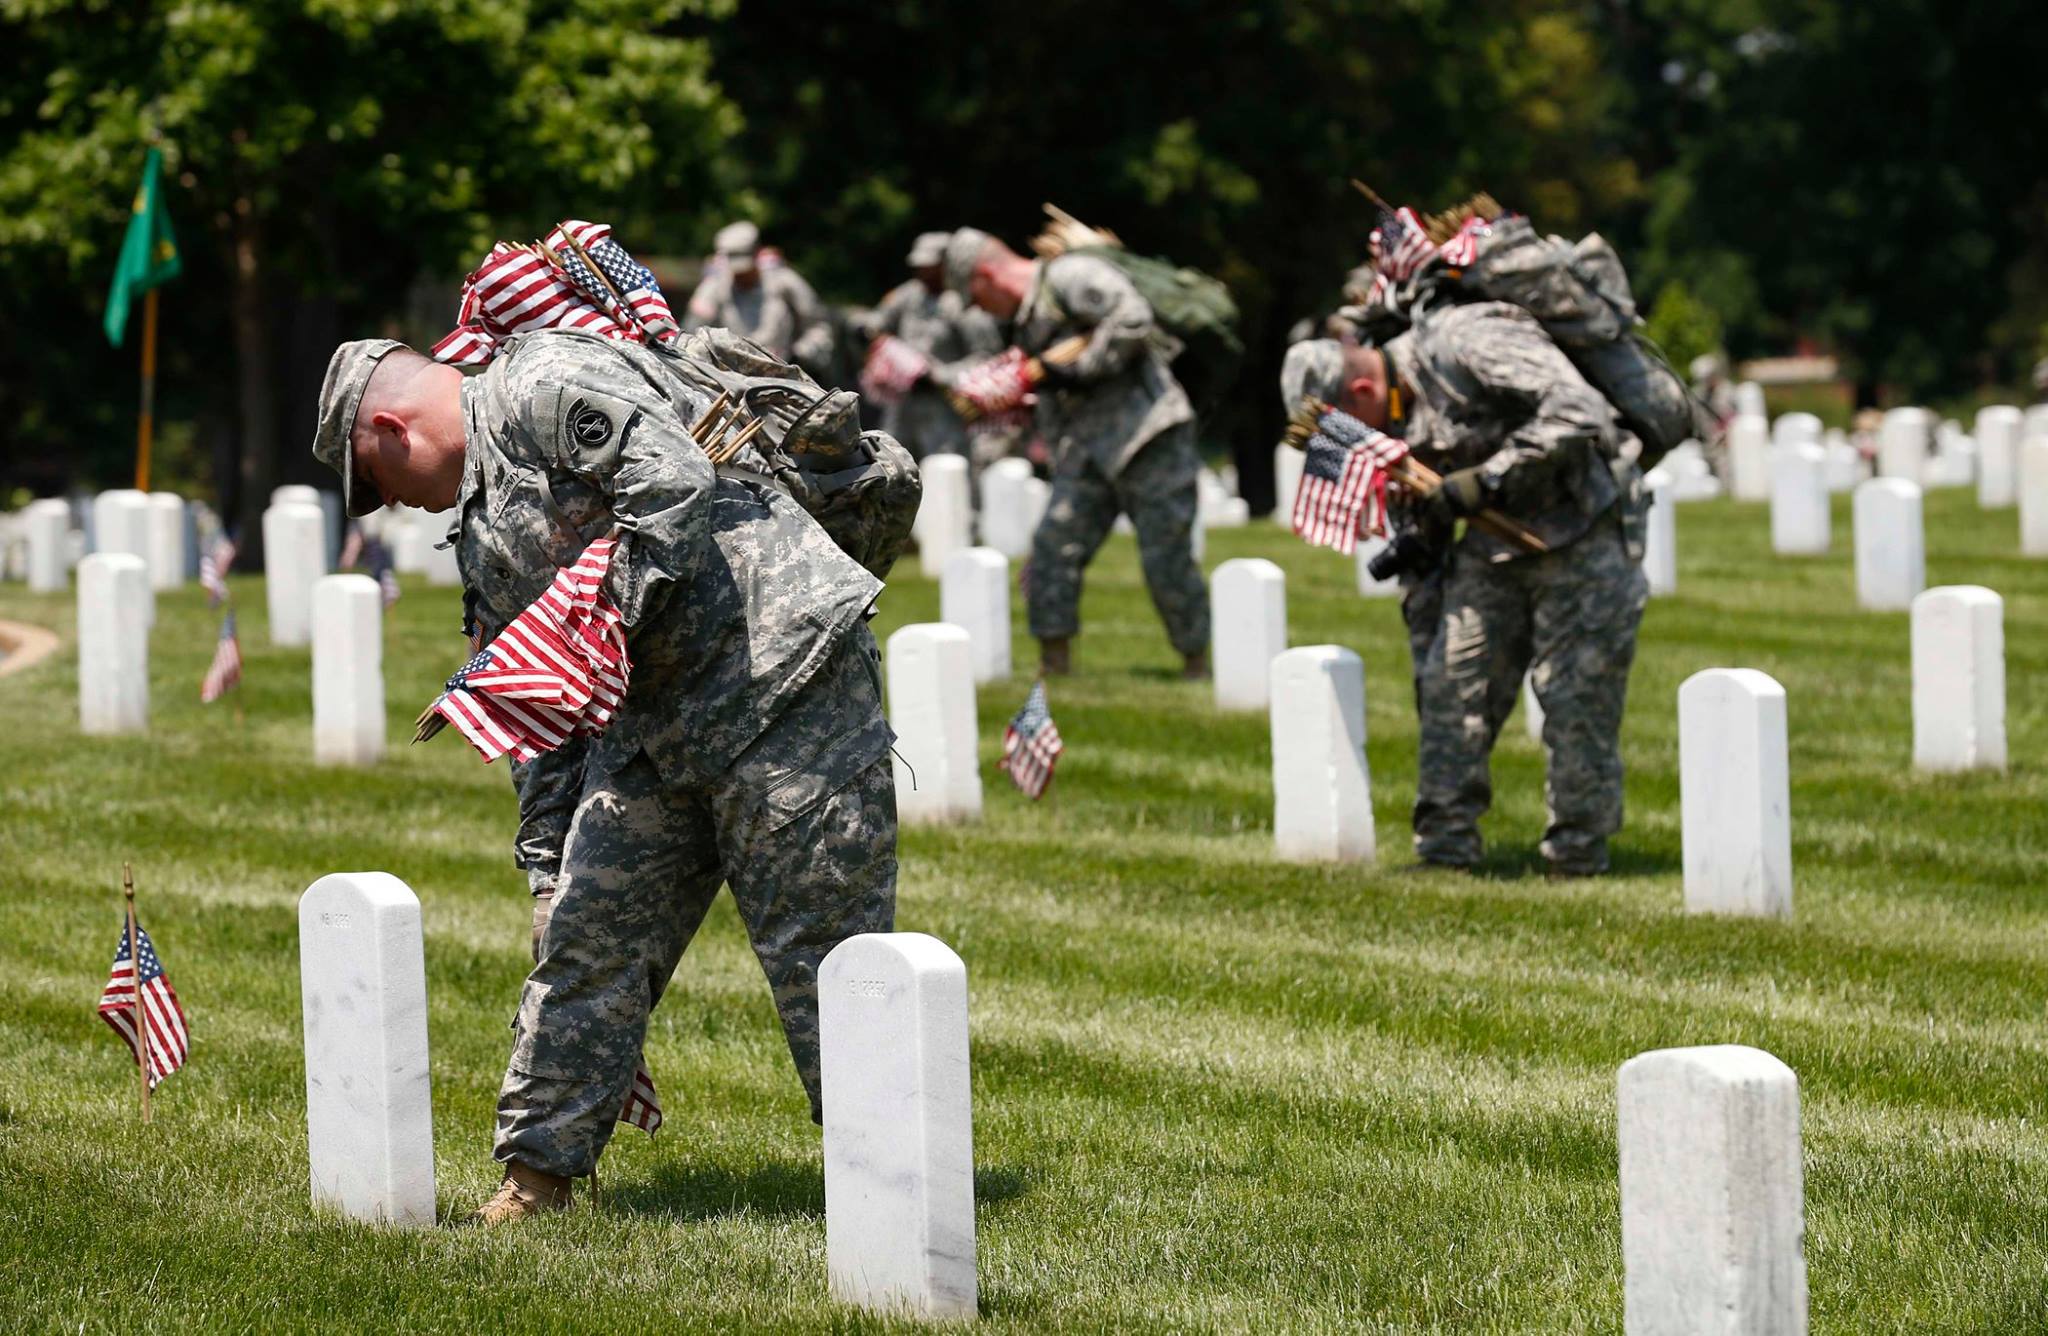 Military planting flags on Memorial Day